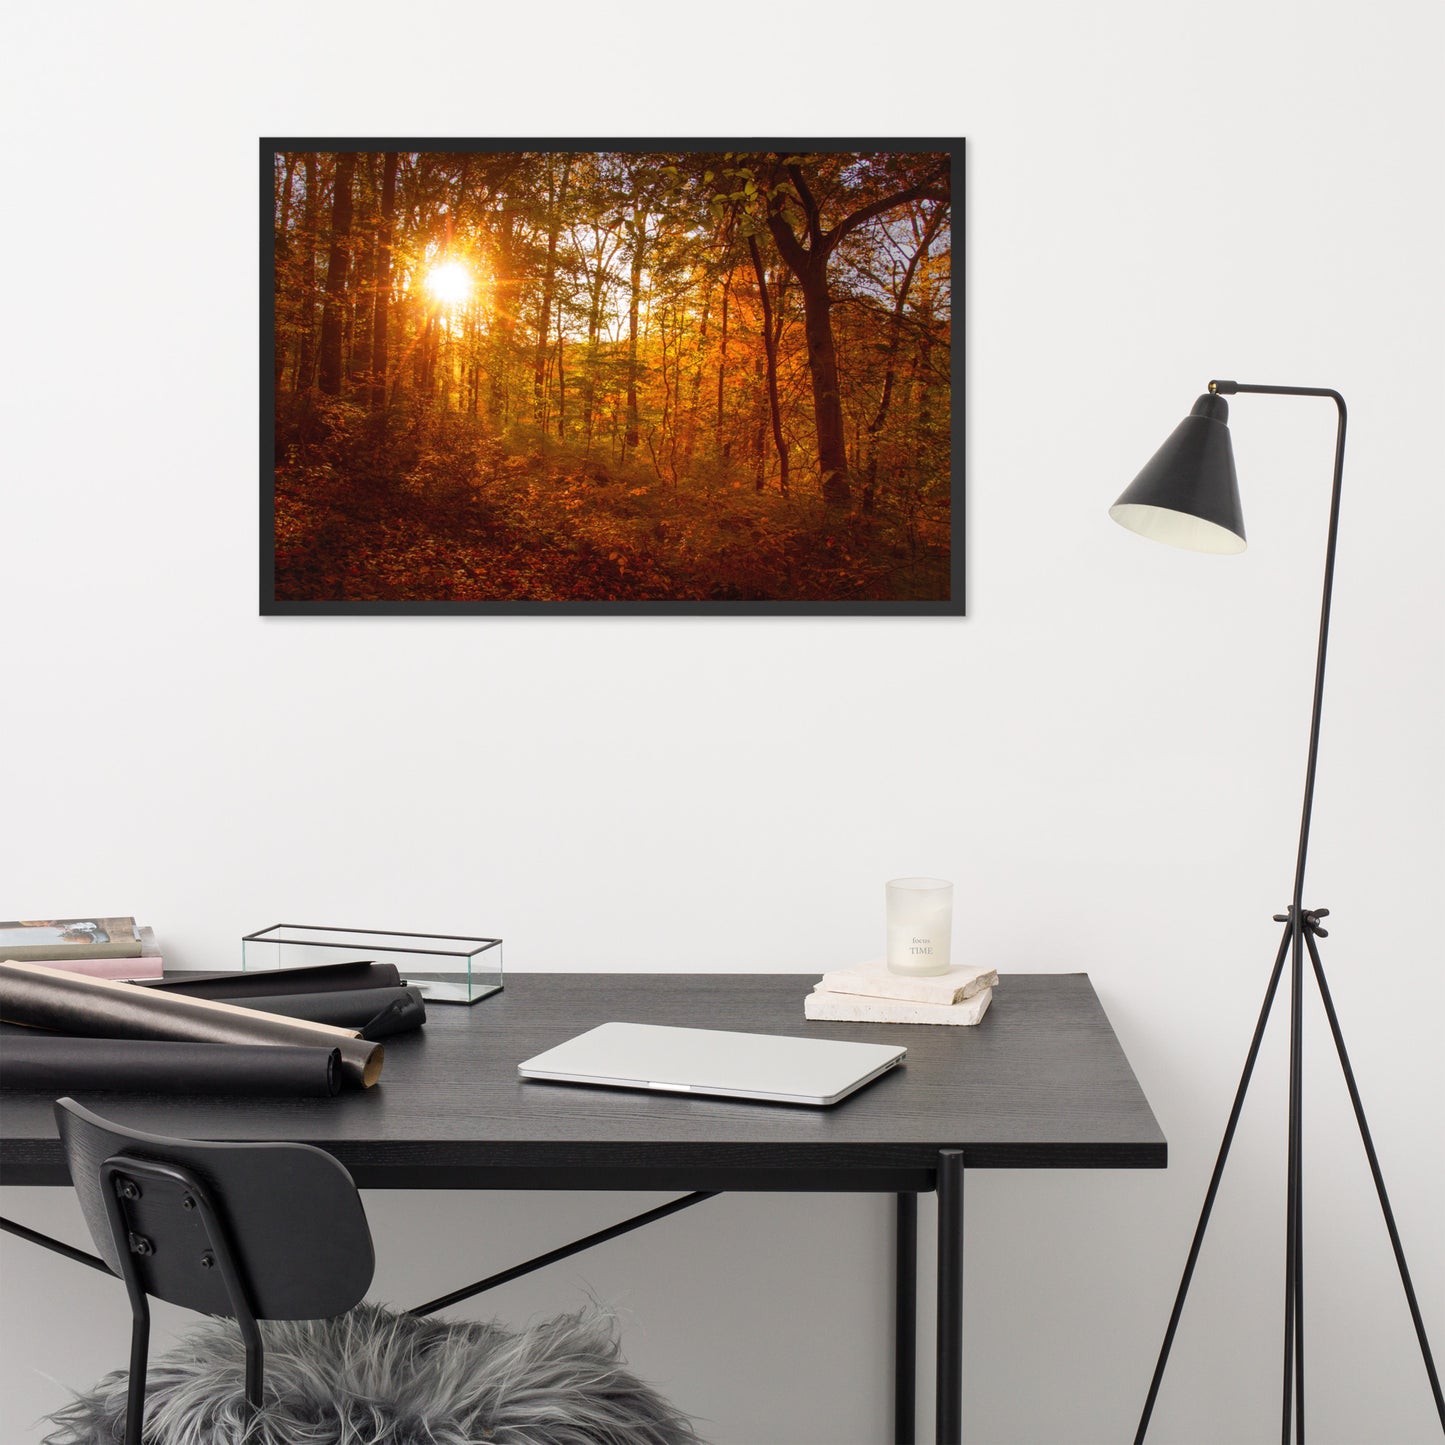 Autumn Sunset in the Trees Rural Landscape Framed Photo Paper Wall Art Prints